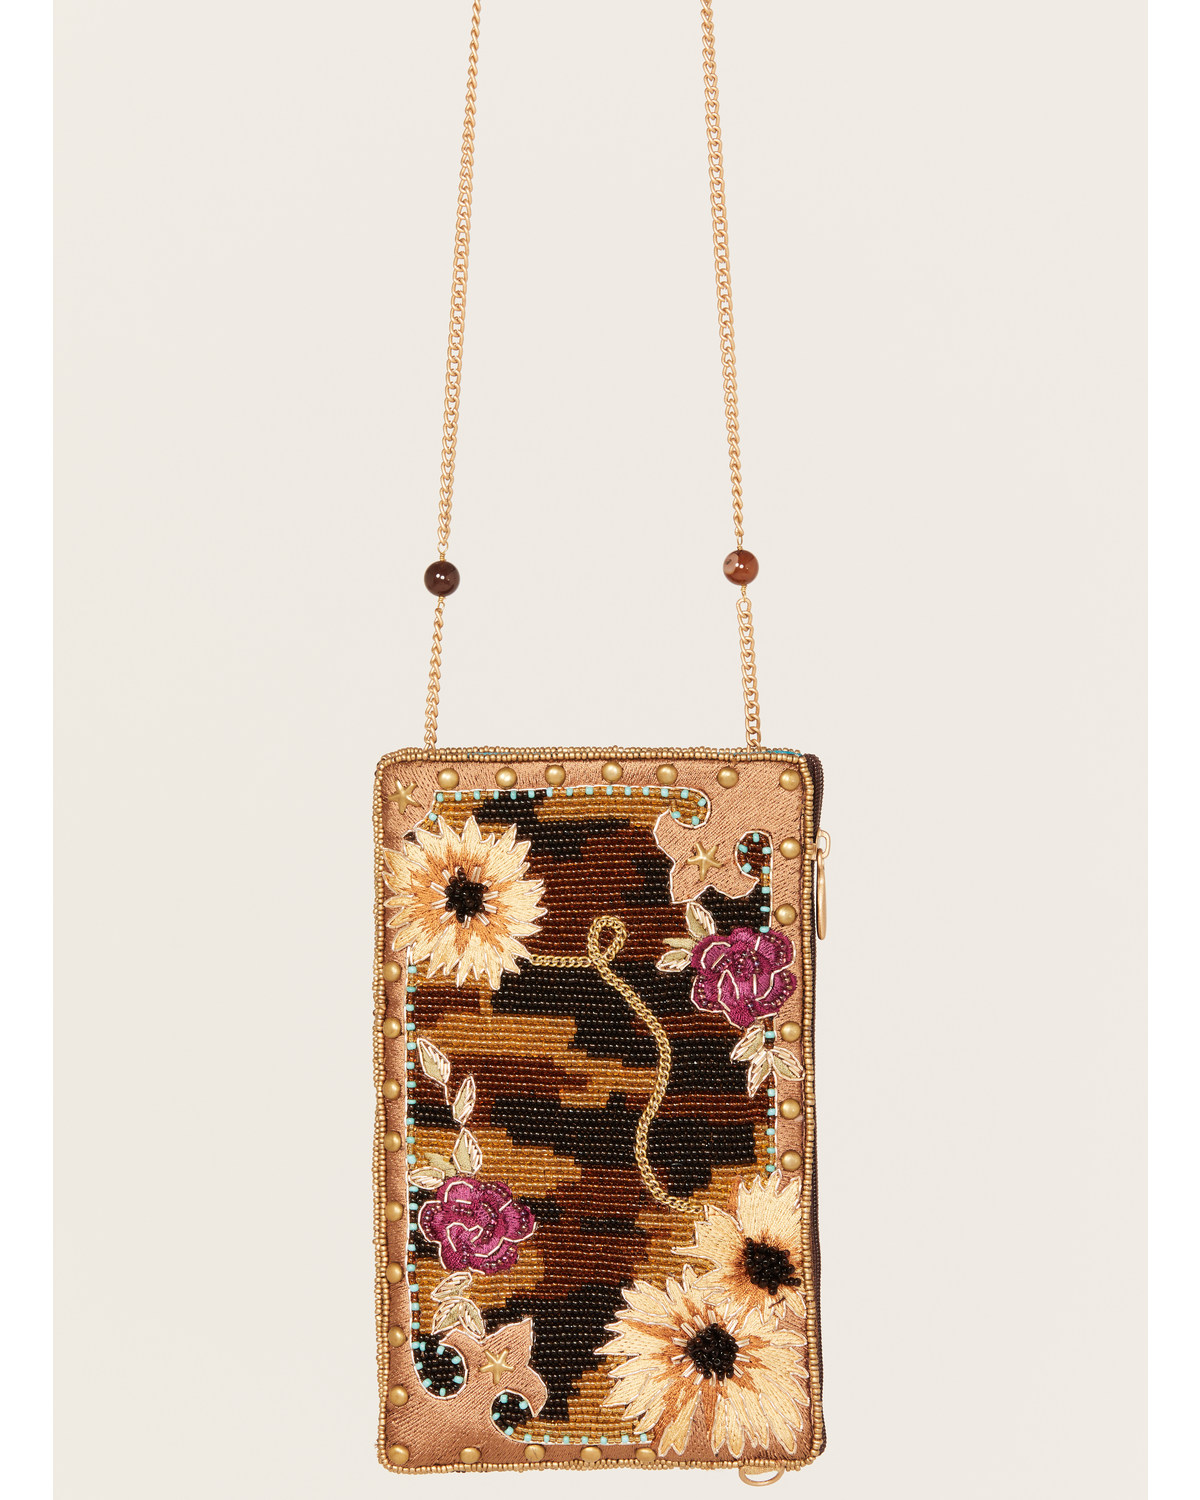 Mary Frances Women's Out on the Prairie Handmade Sunflower Embroidered Crossbody Phone Bag